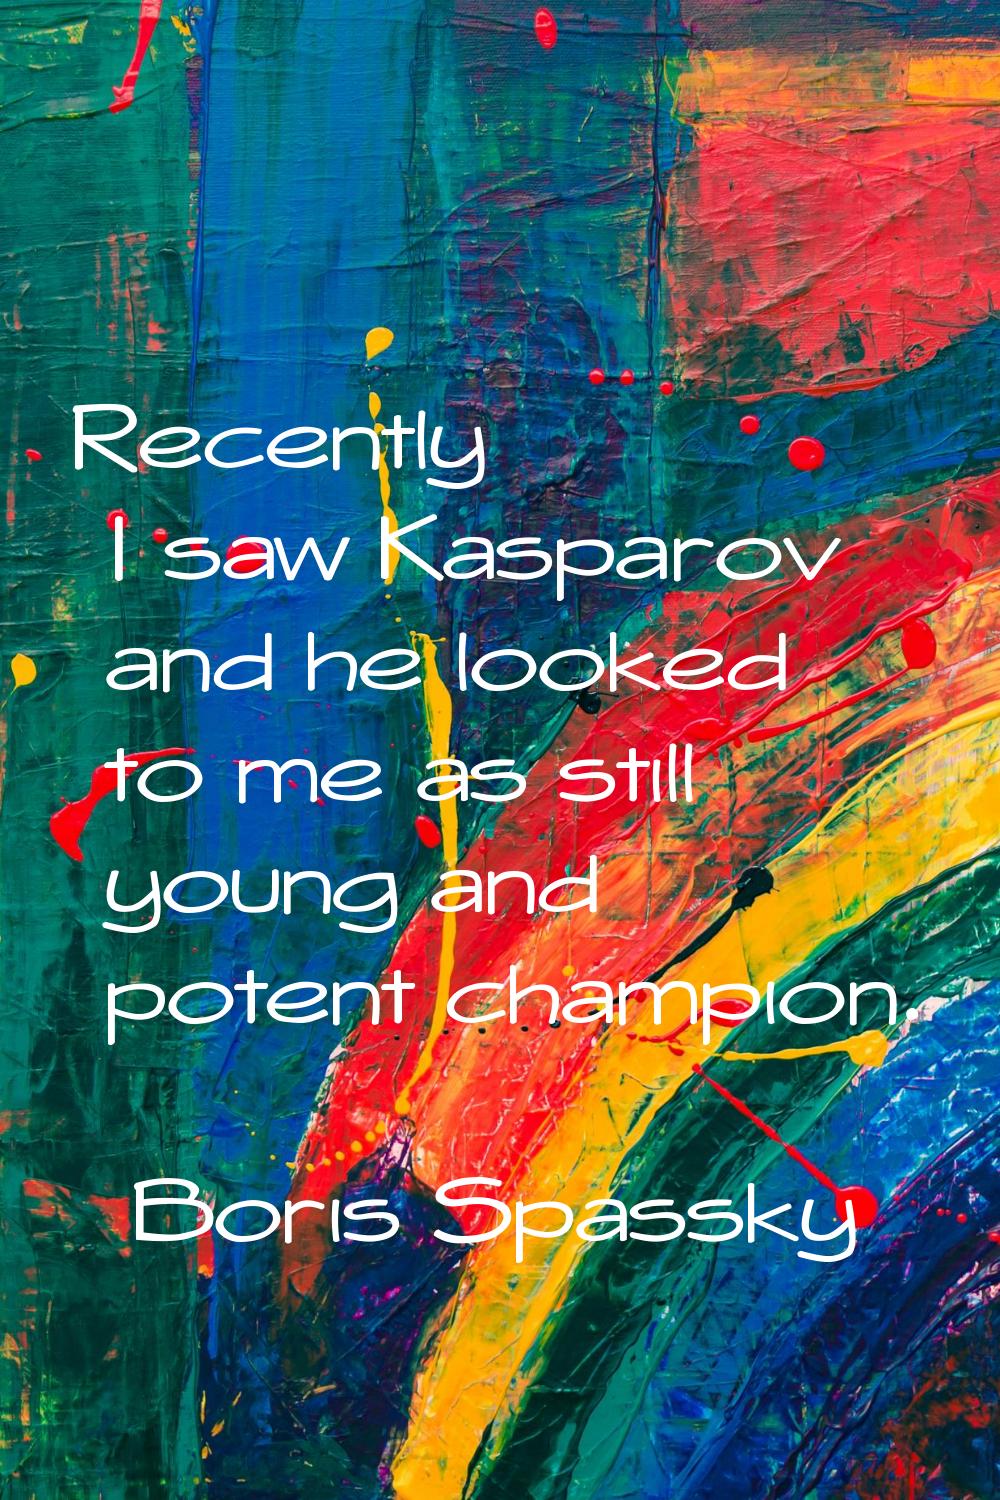 Recently I saw Kasparov and he looked to me as still young and potent champion.